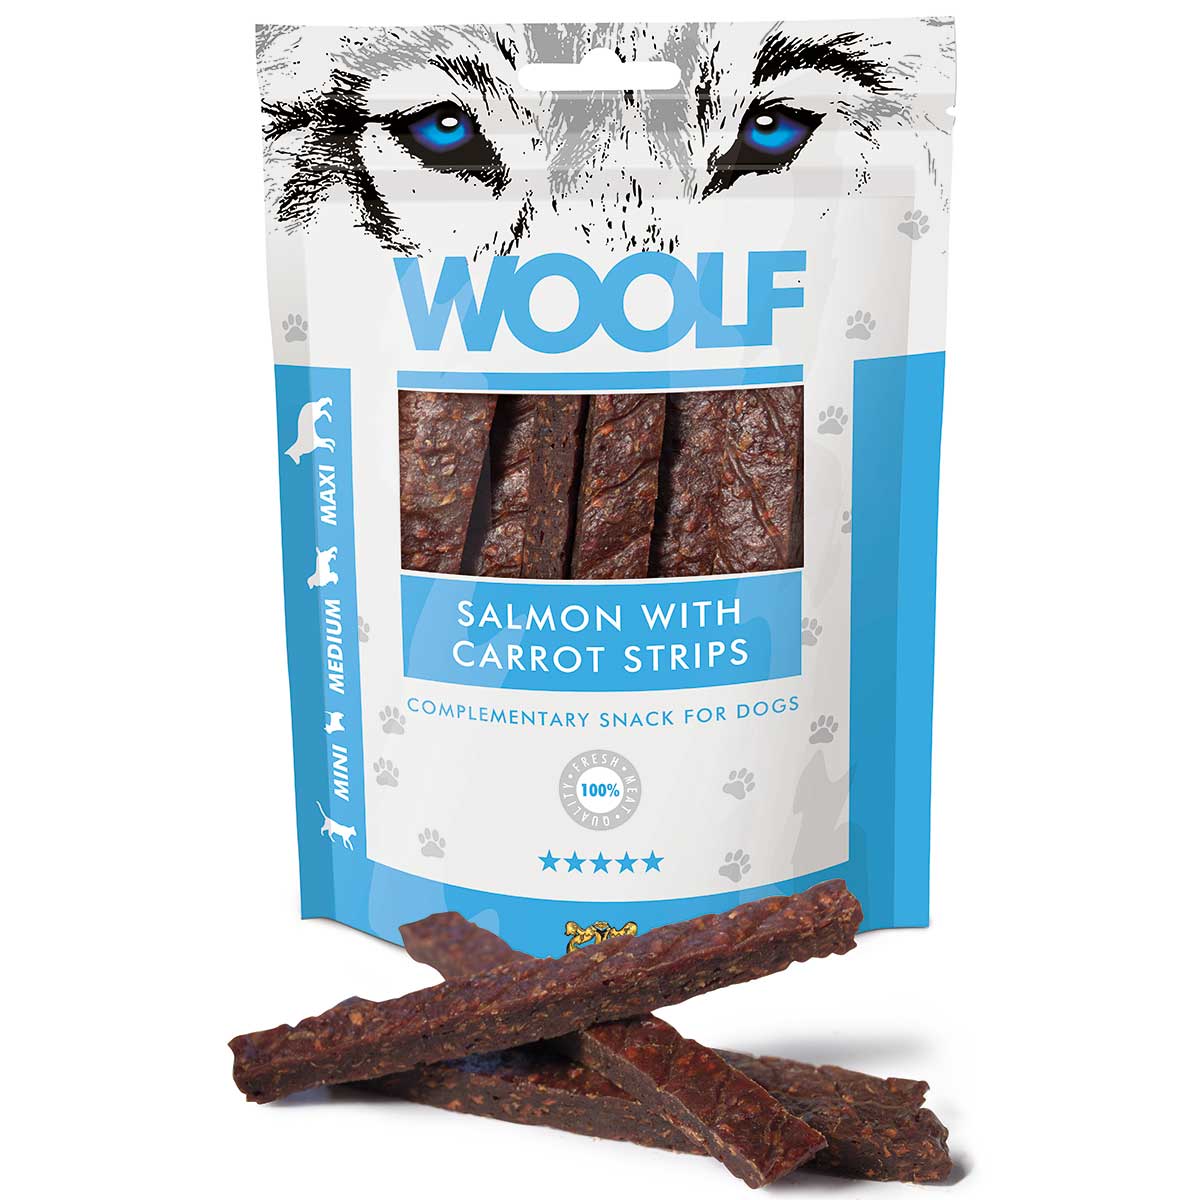 Woolf Dog treat salmon strips with carrots